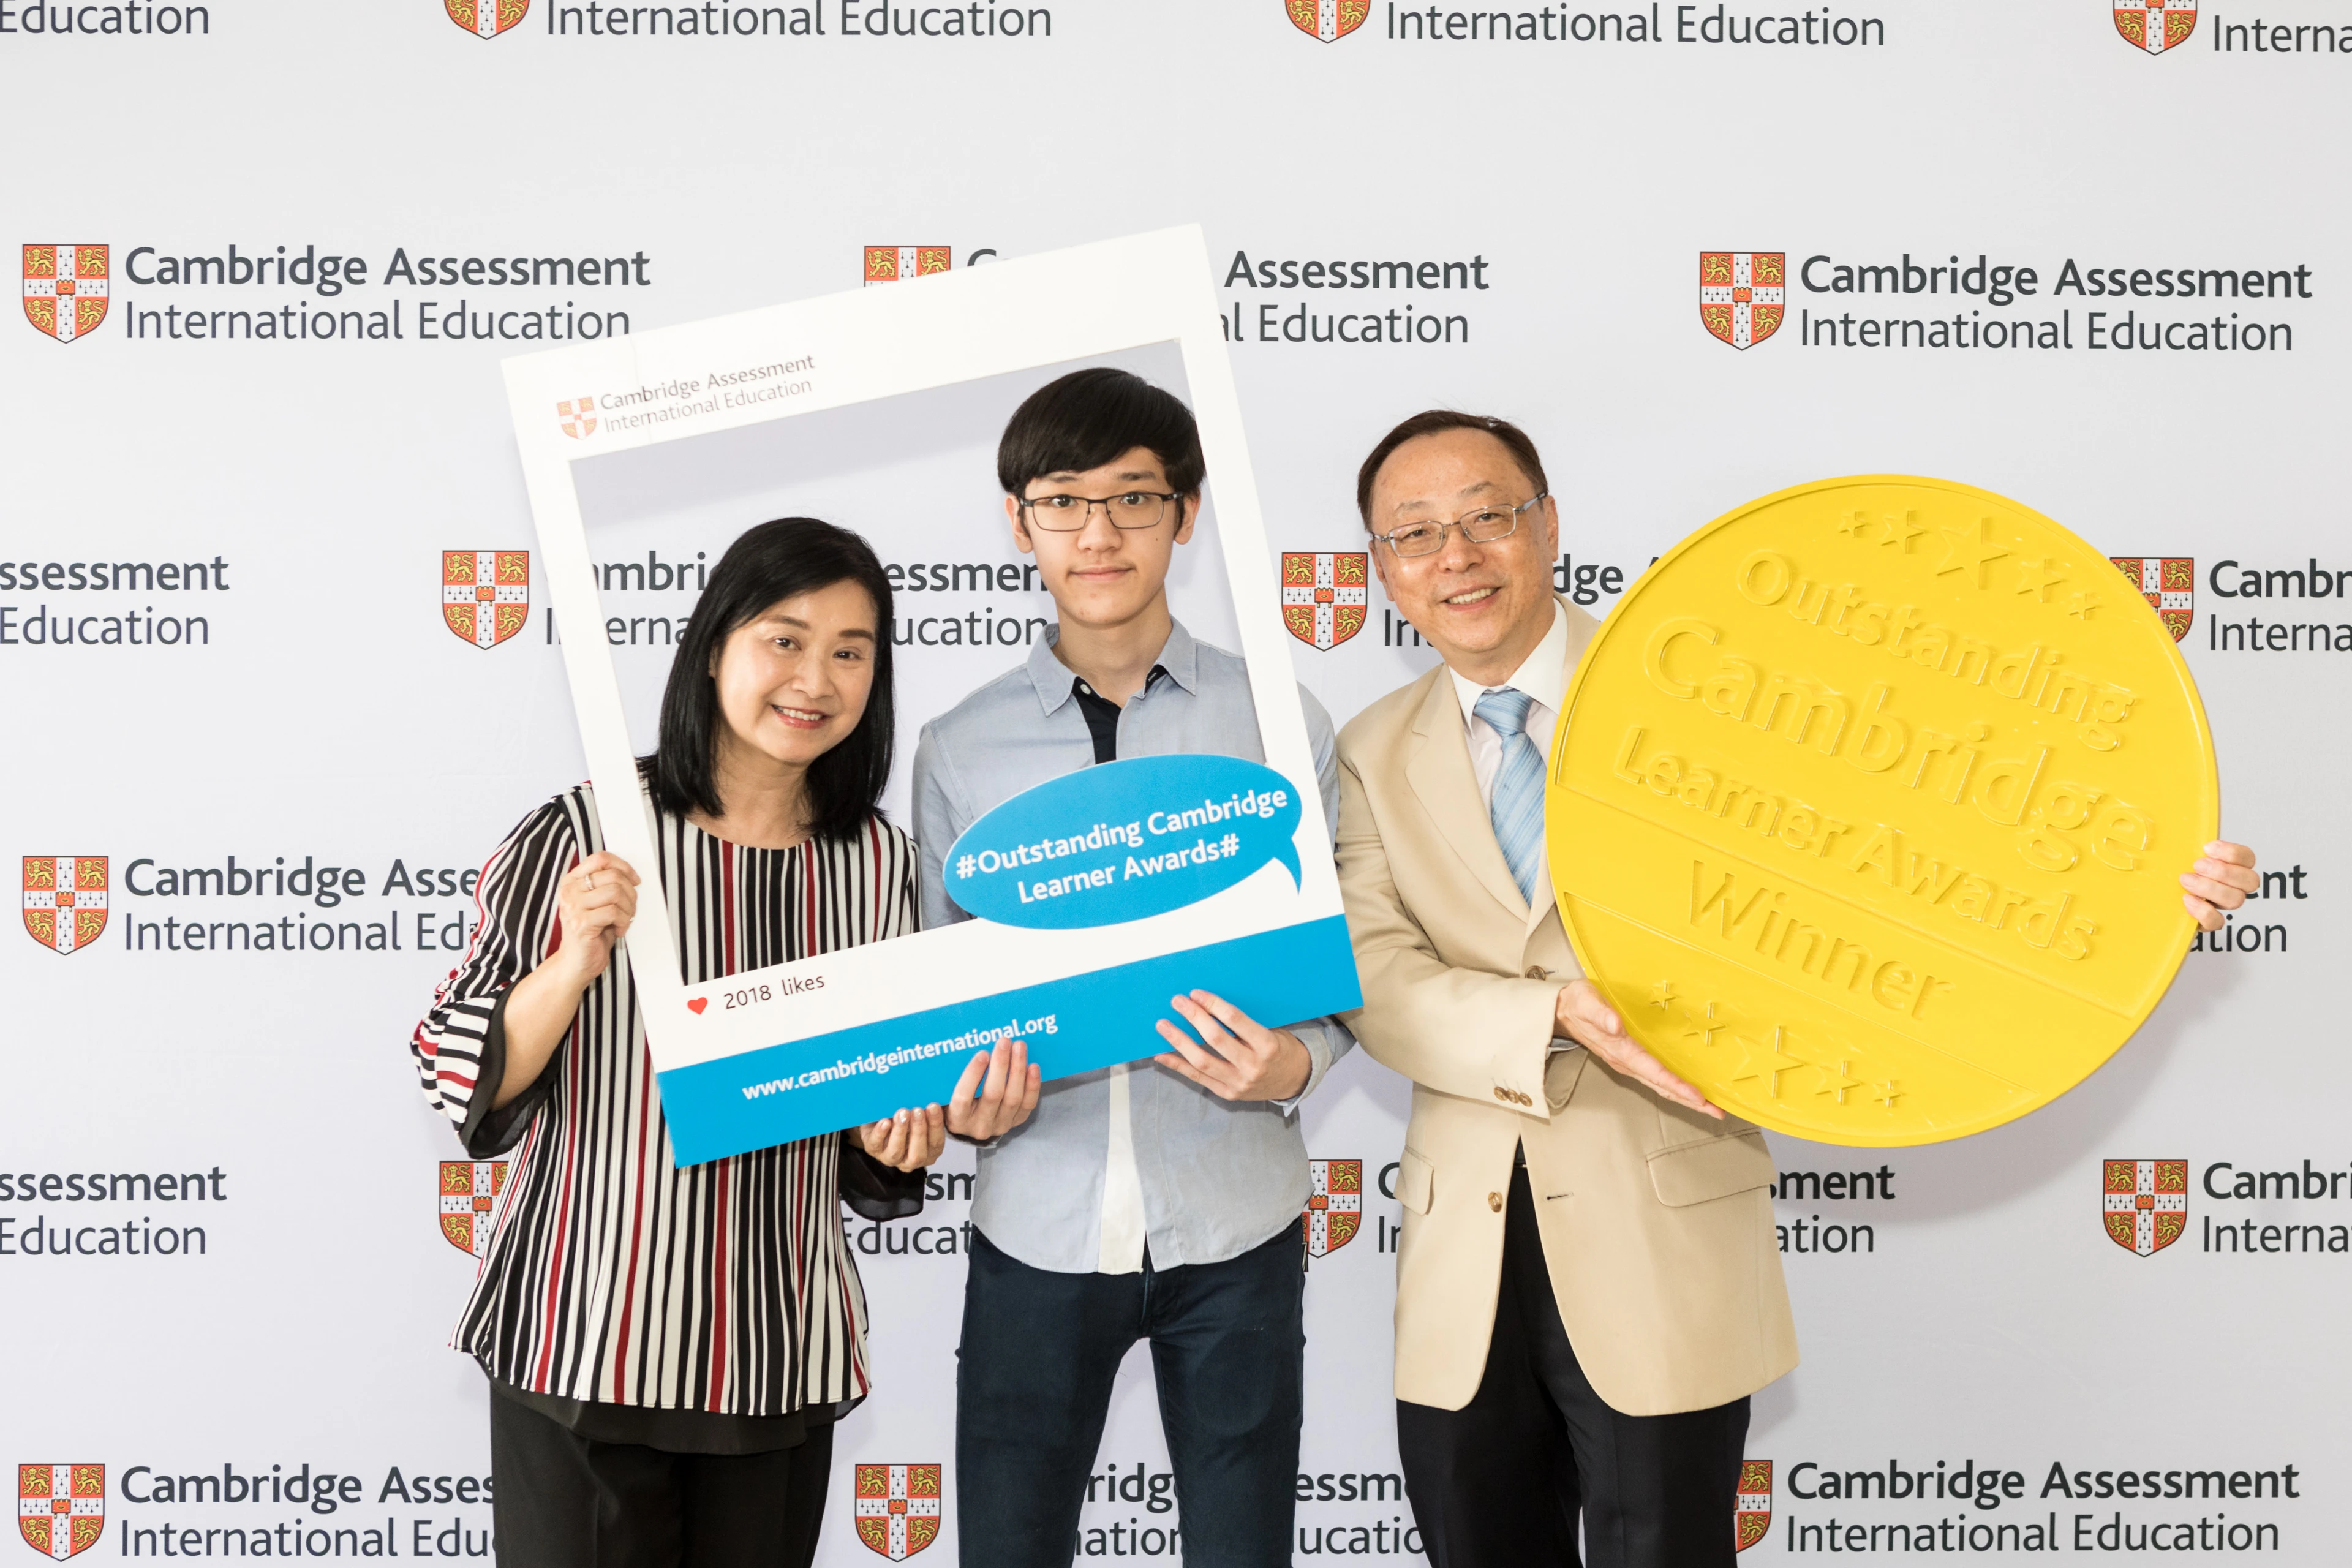 Dr. Chin presented the Outstanding Cambridge Learners Awards certificates and medals to Ho Chun